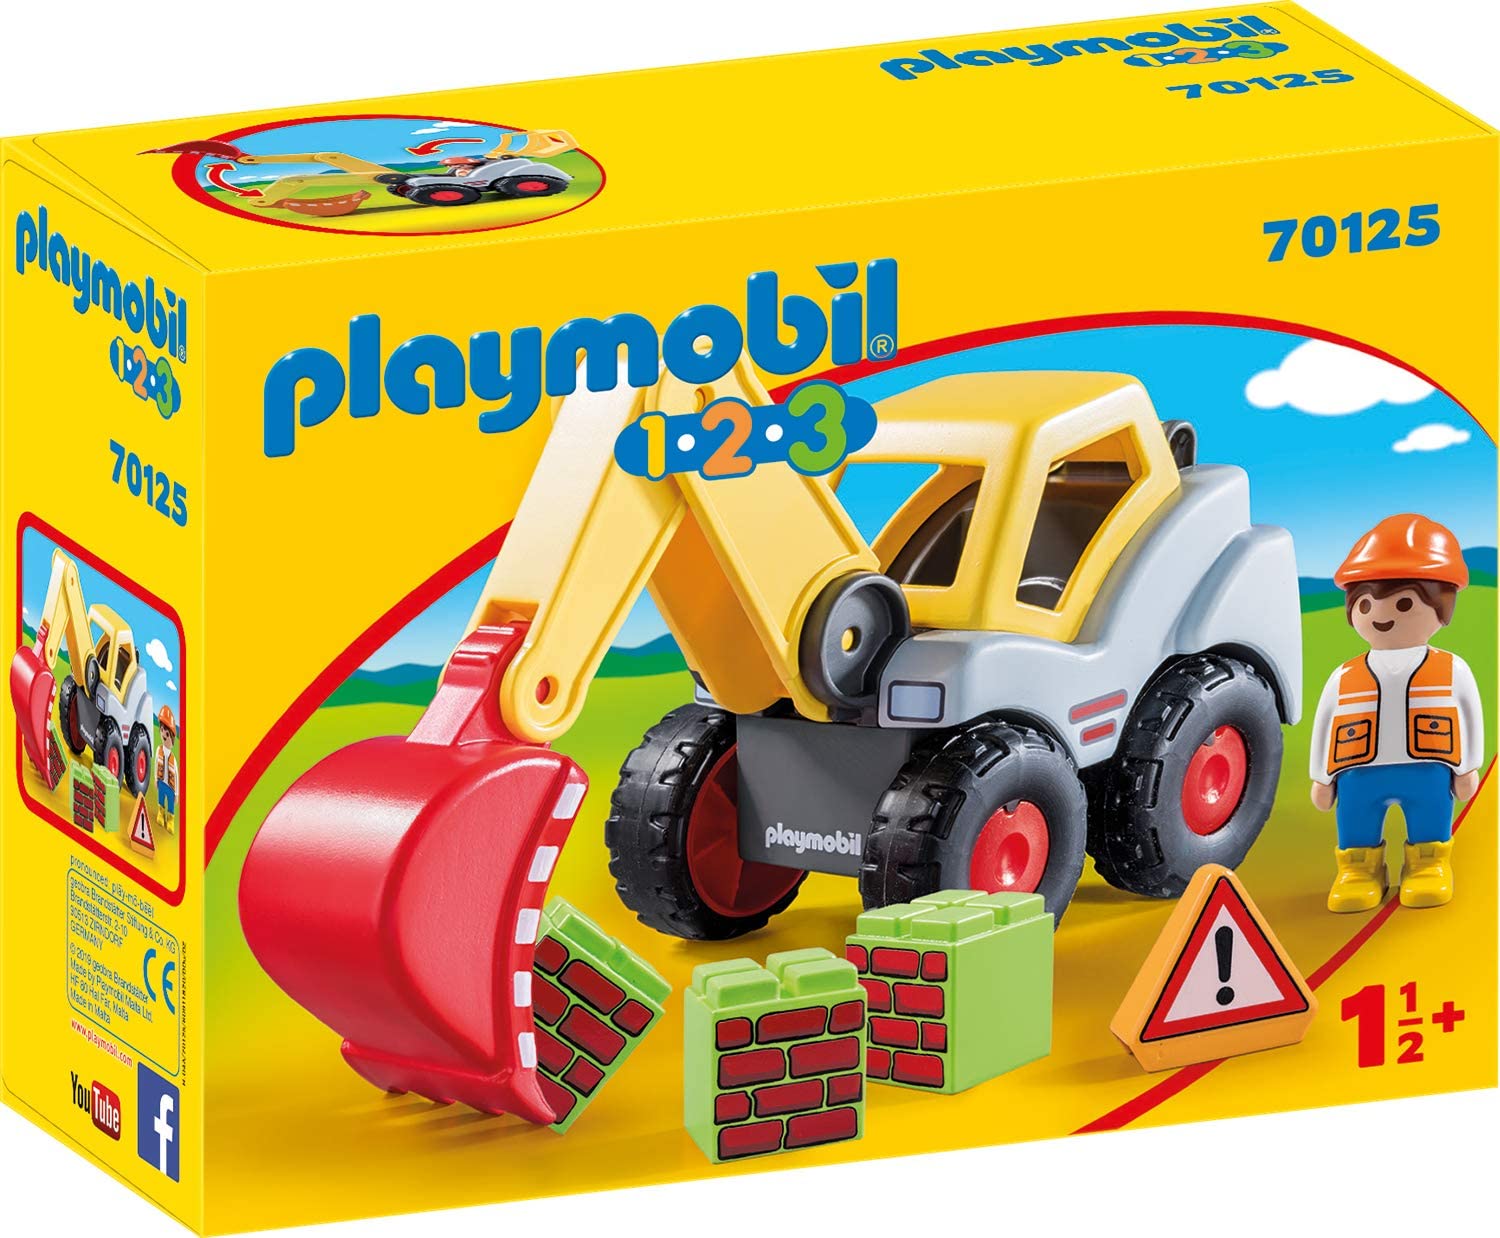 Playmobil 70125 1.2.3 Excavator For Ages 18 Months And Above, One Size, Mul